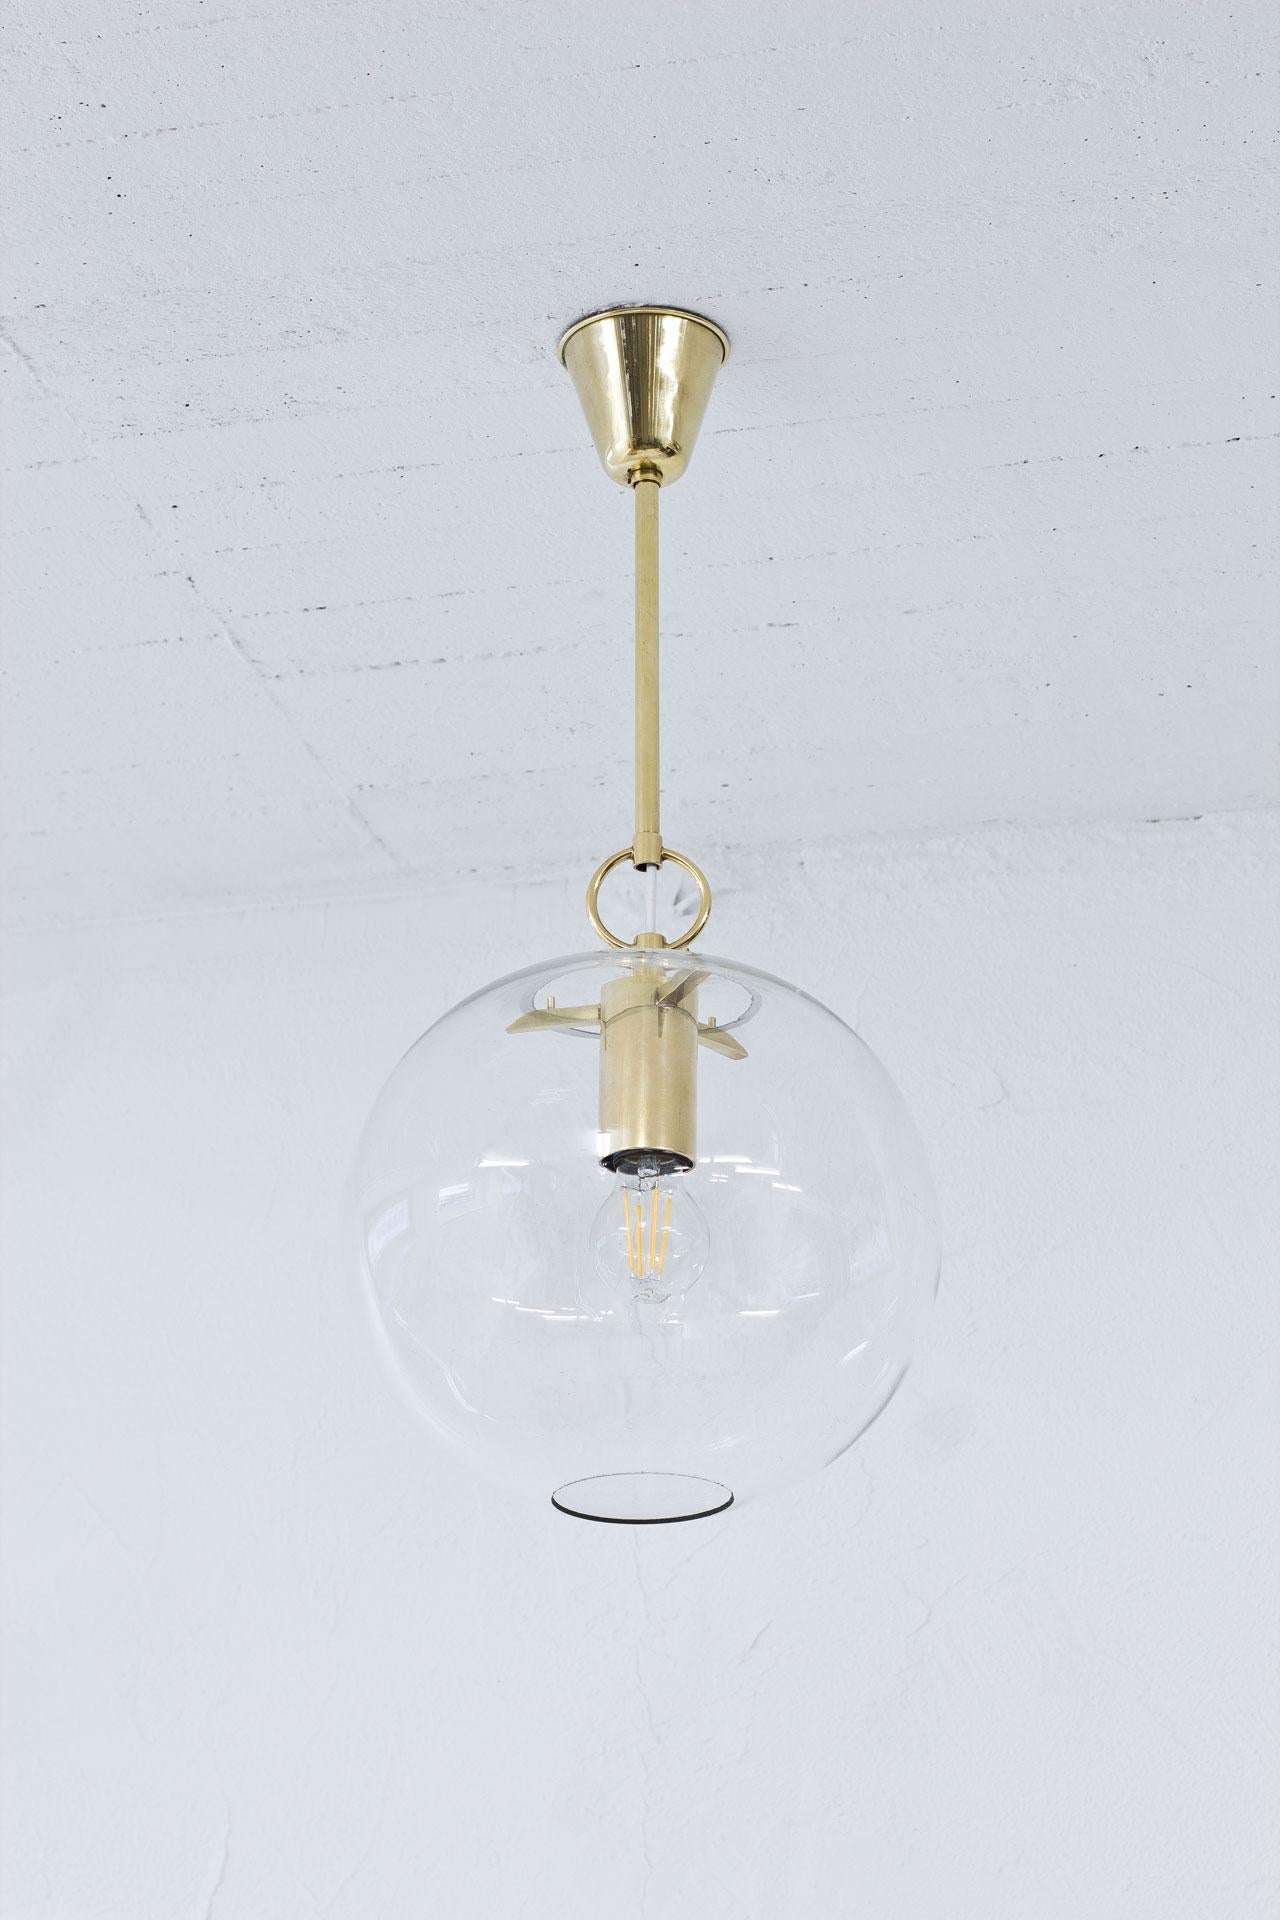 Pendant lamp designed  by Hans-Agne Jakobsson during the 1950s. Manufactured by his own company in Markaryd, Sweden. The lamp os made from brass fittings with original clear glass shade.
Electricity has been redone. 